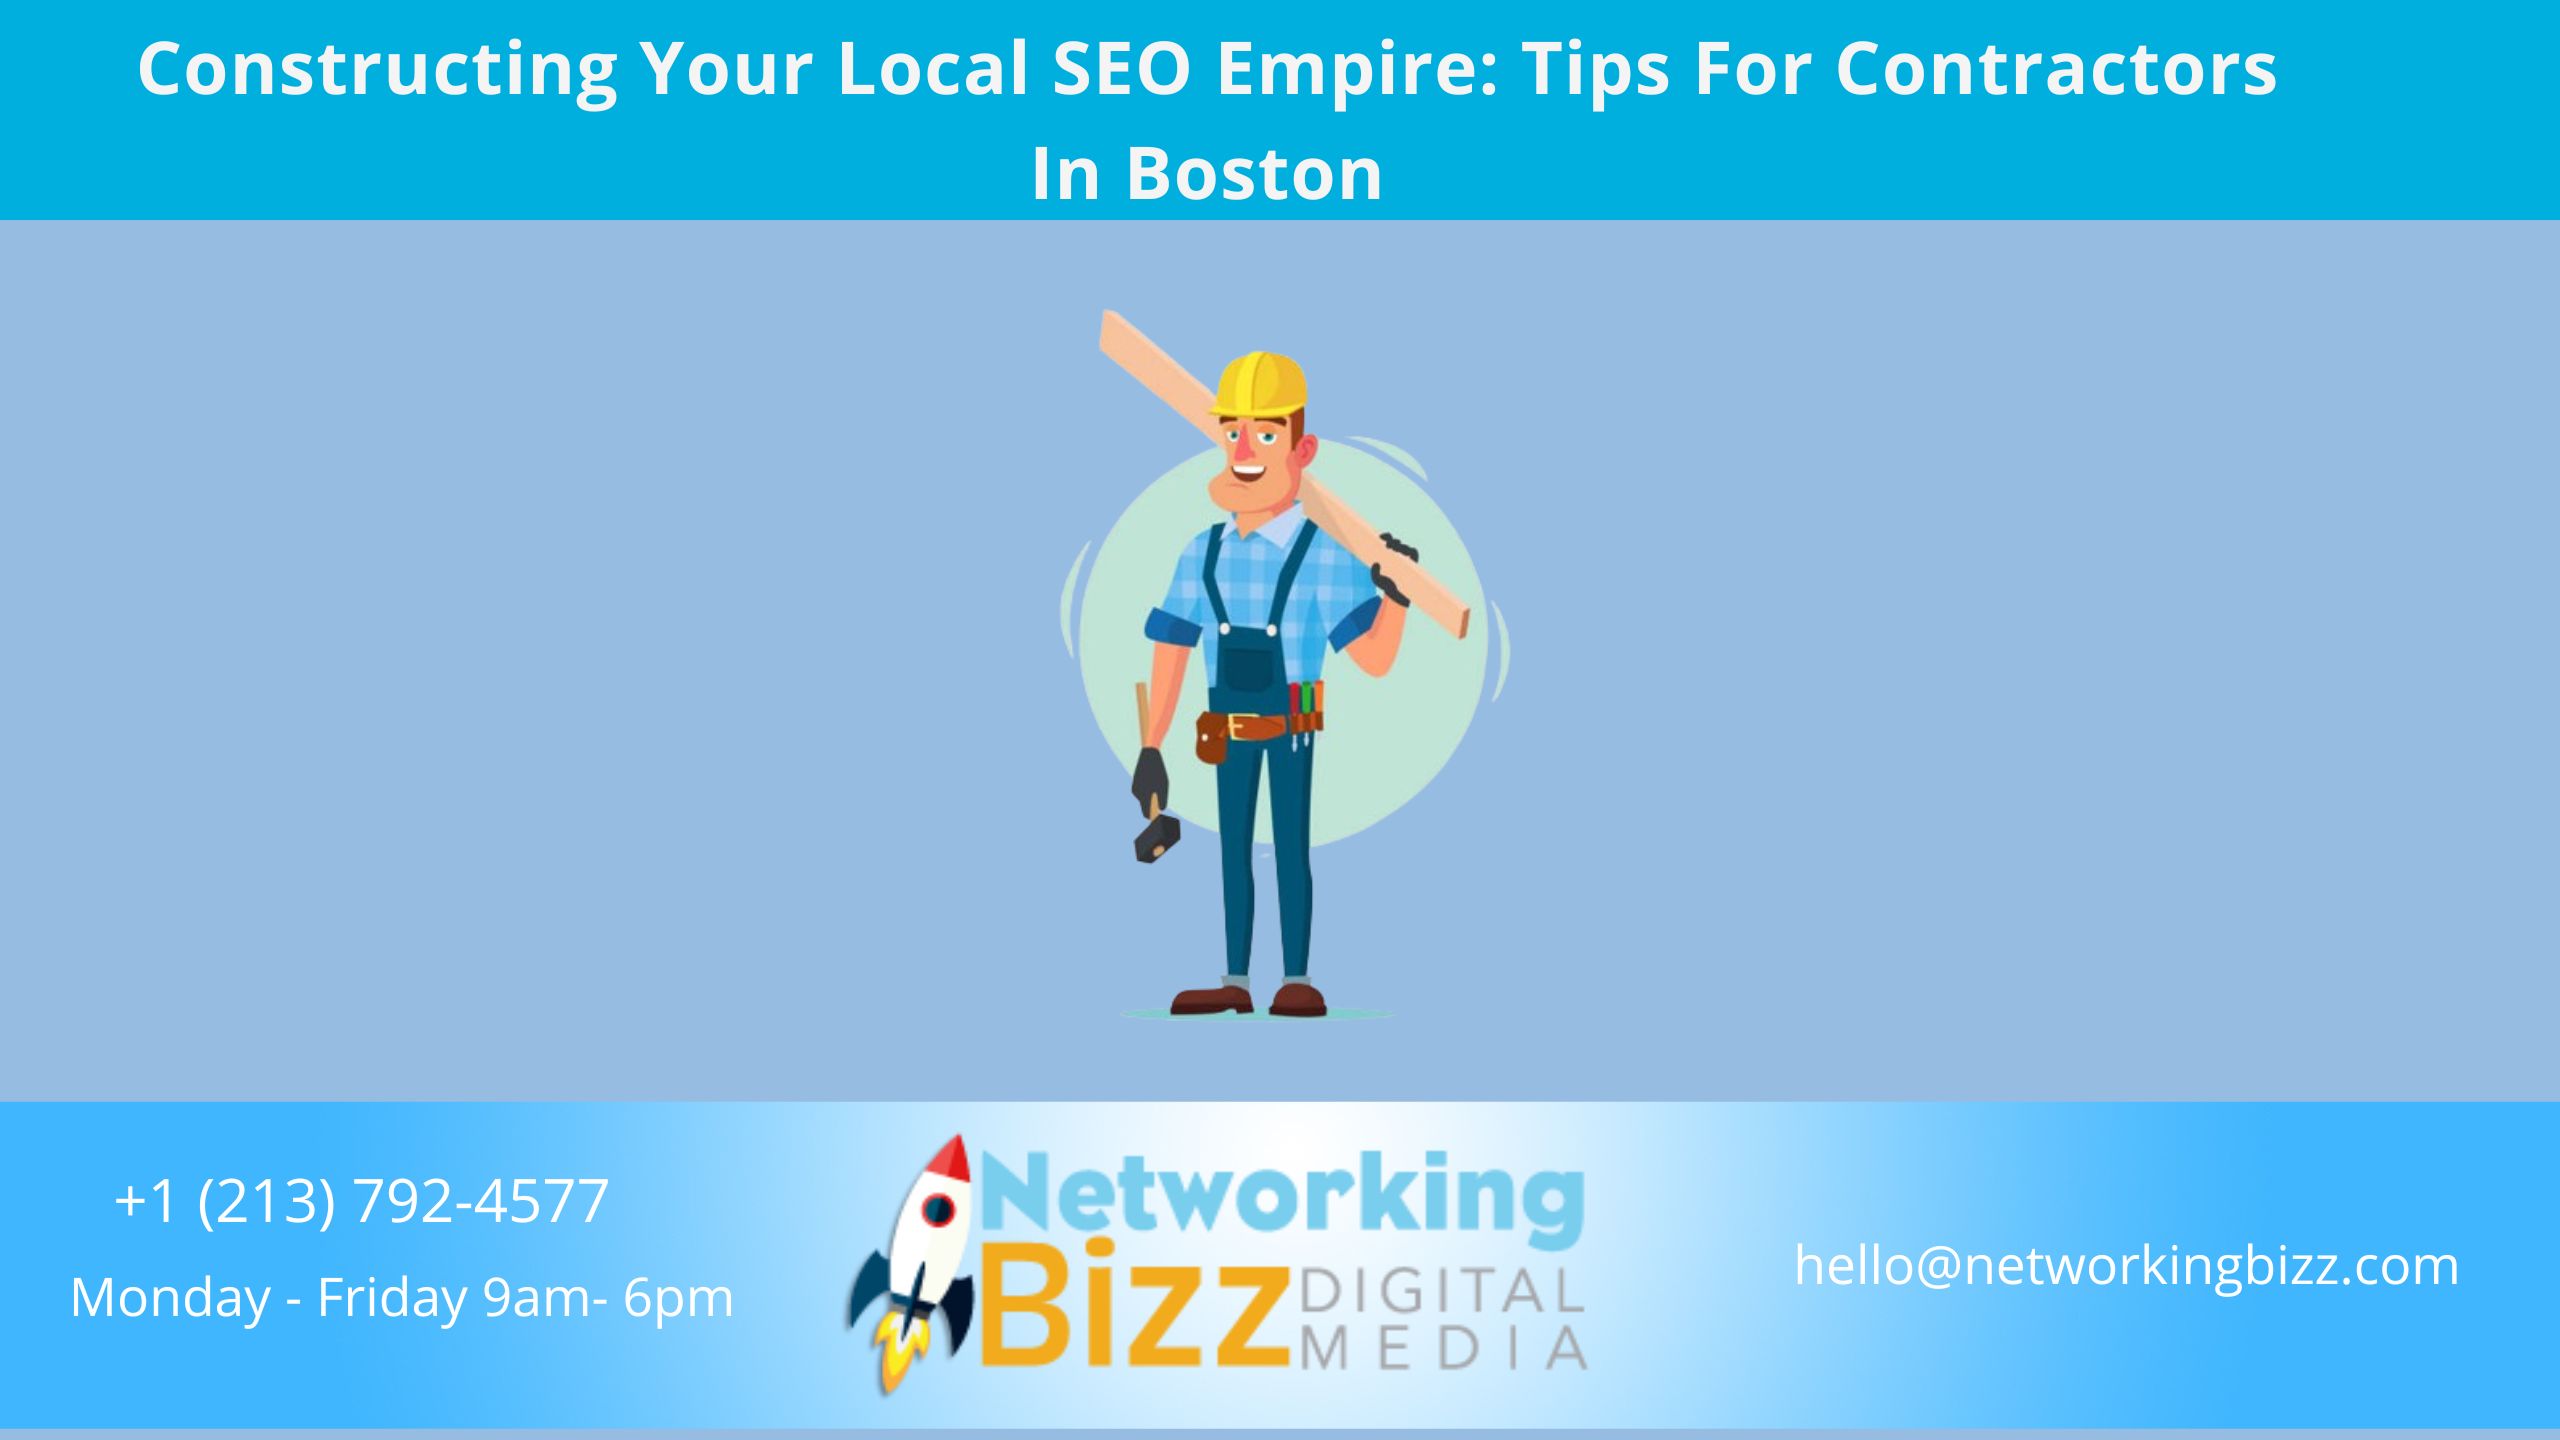 Constructing Your Local SEO Empire: Tips For Contractors In Boston